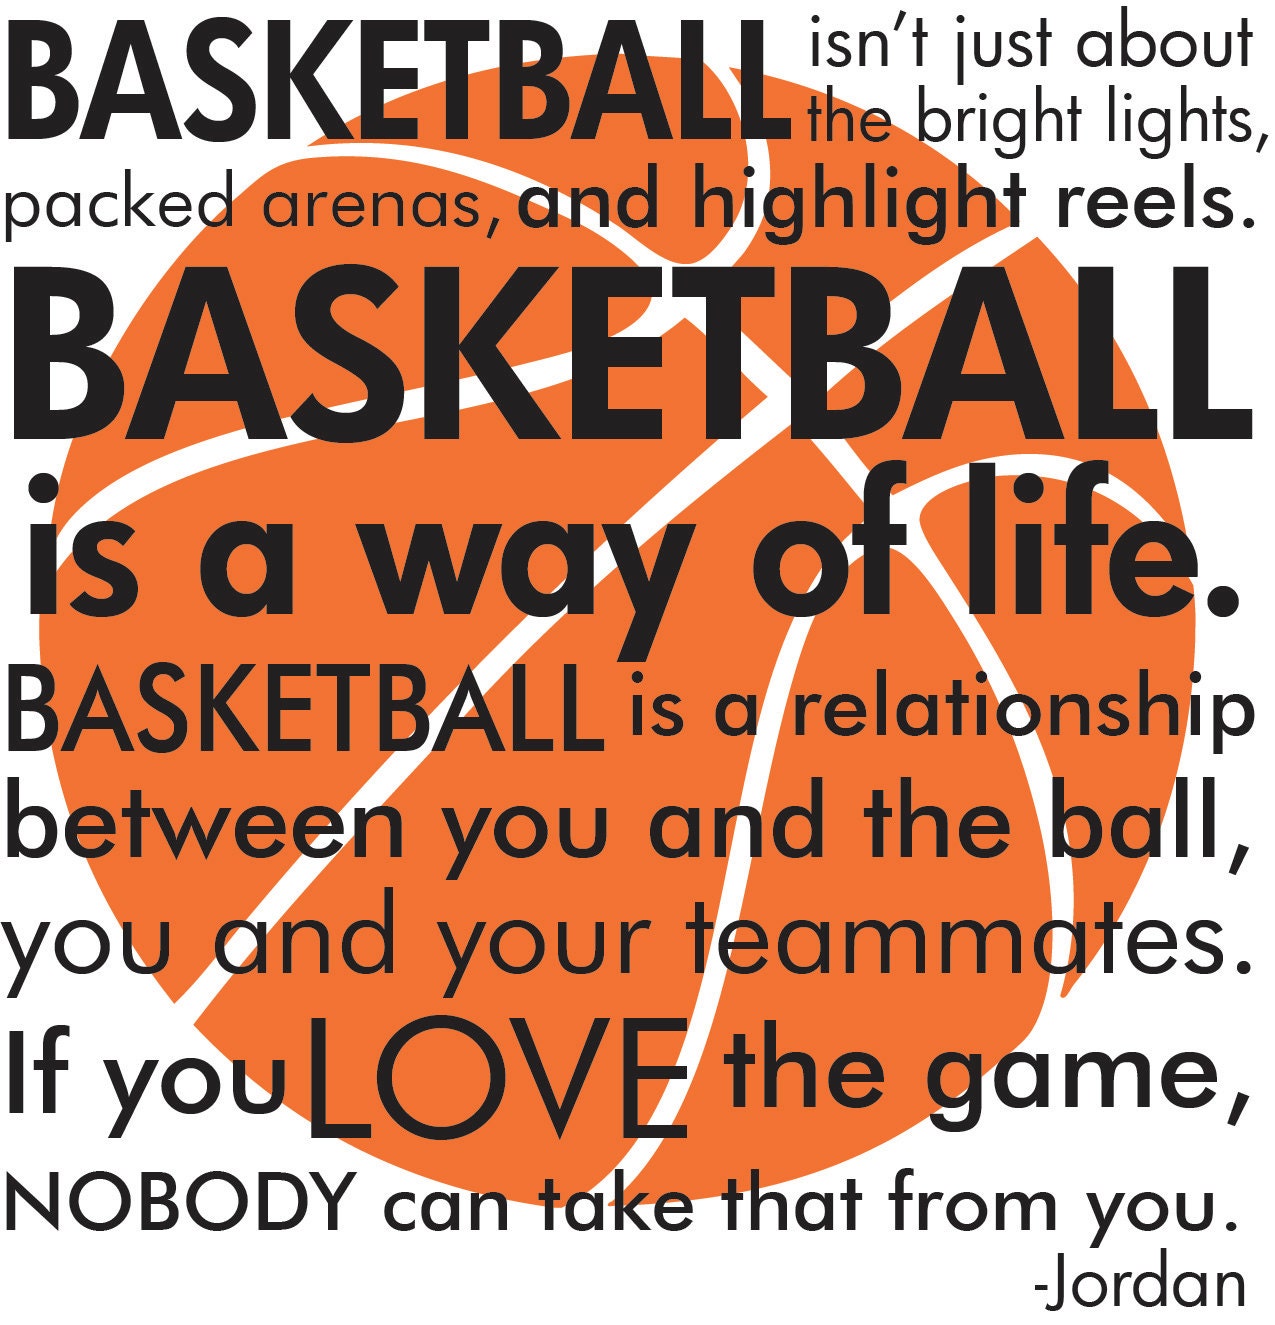 Basketball Michael Jordan quote with basketball by 